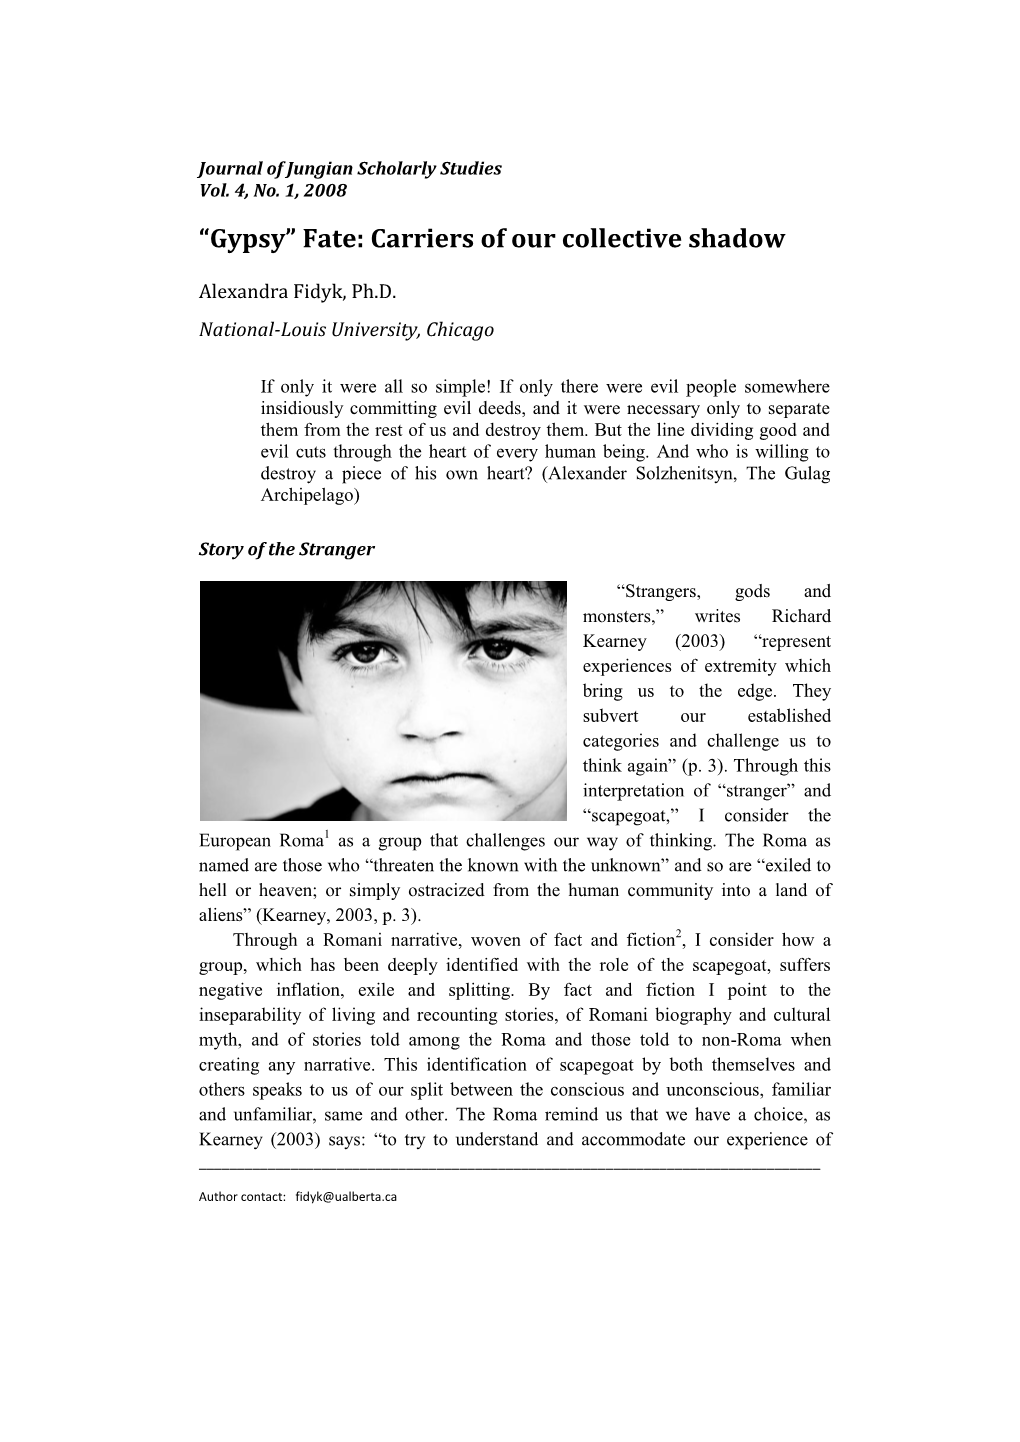 “Gypsy” Fate: Carriers of Our Collective Shadow